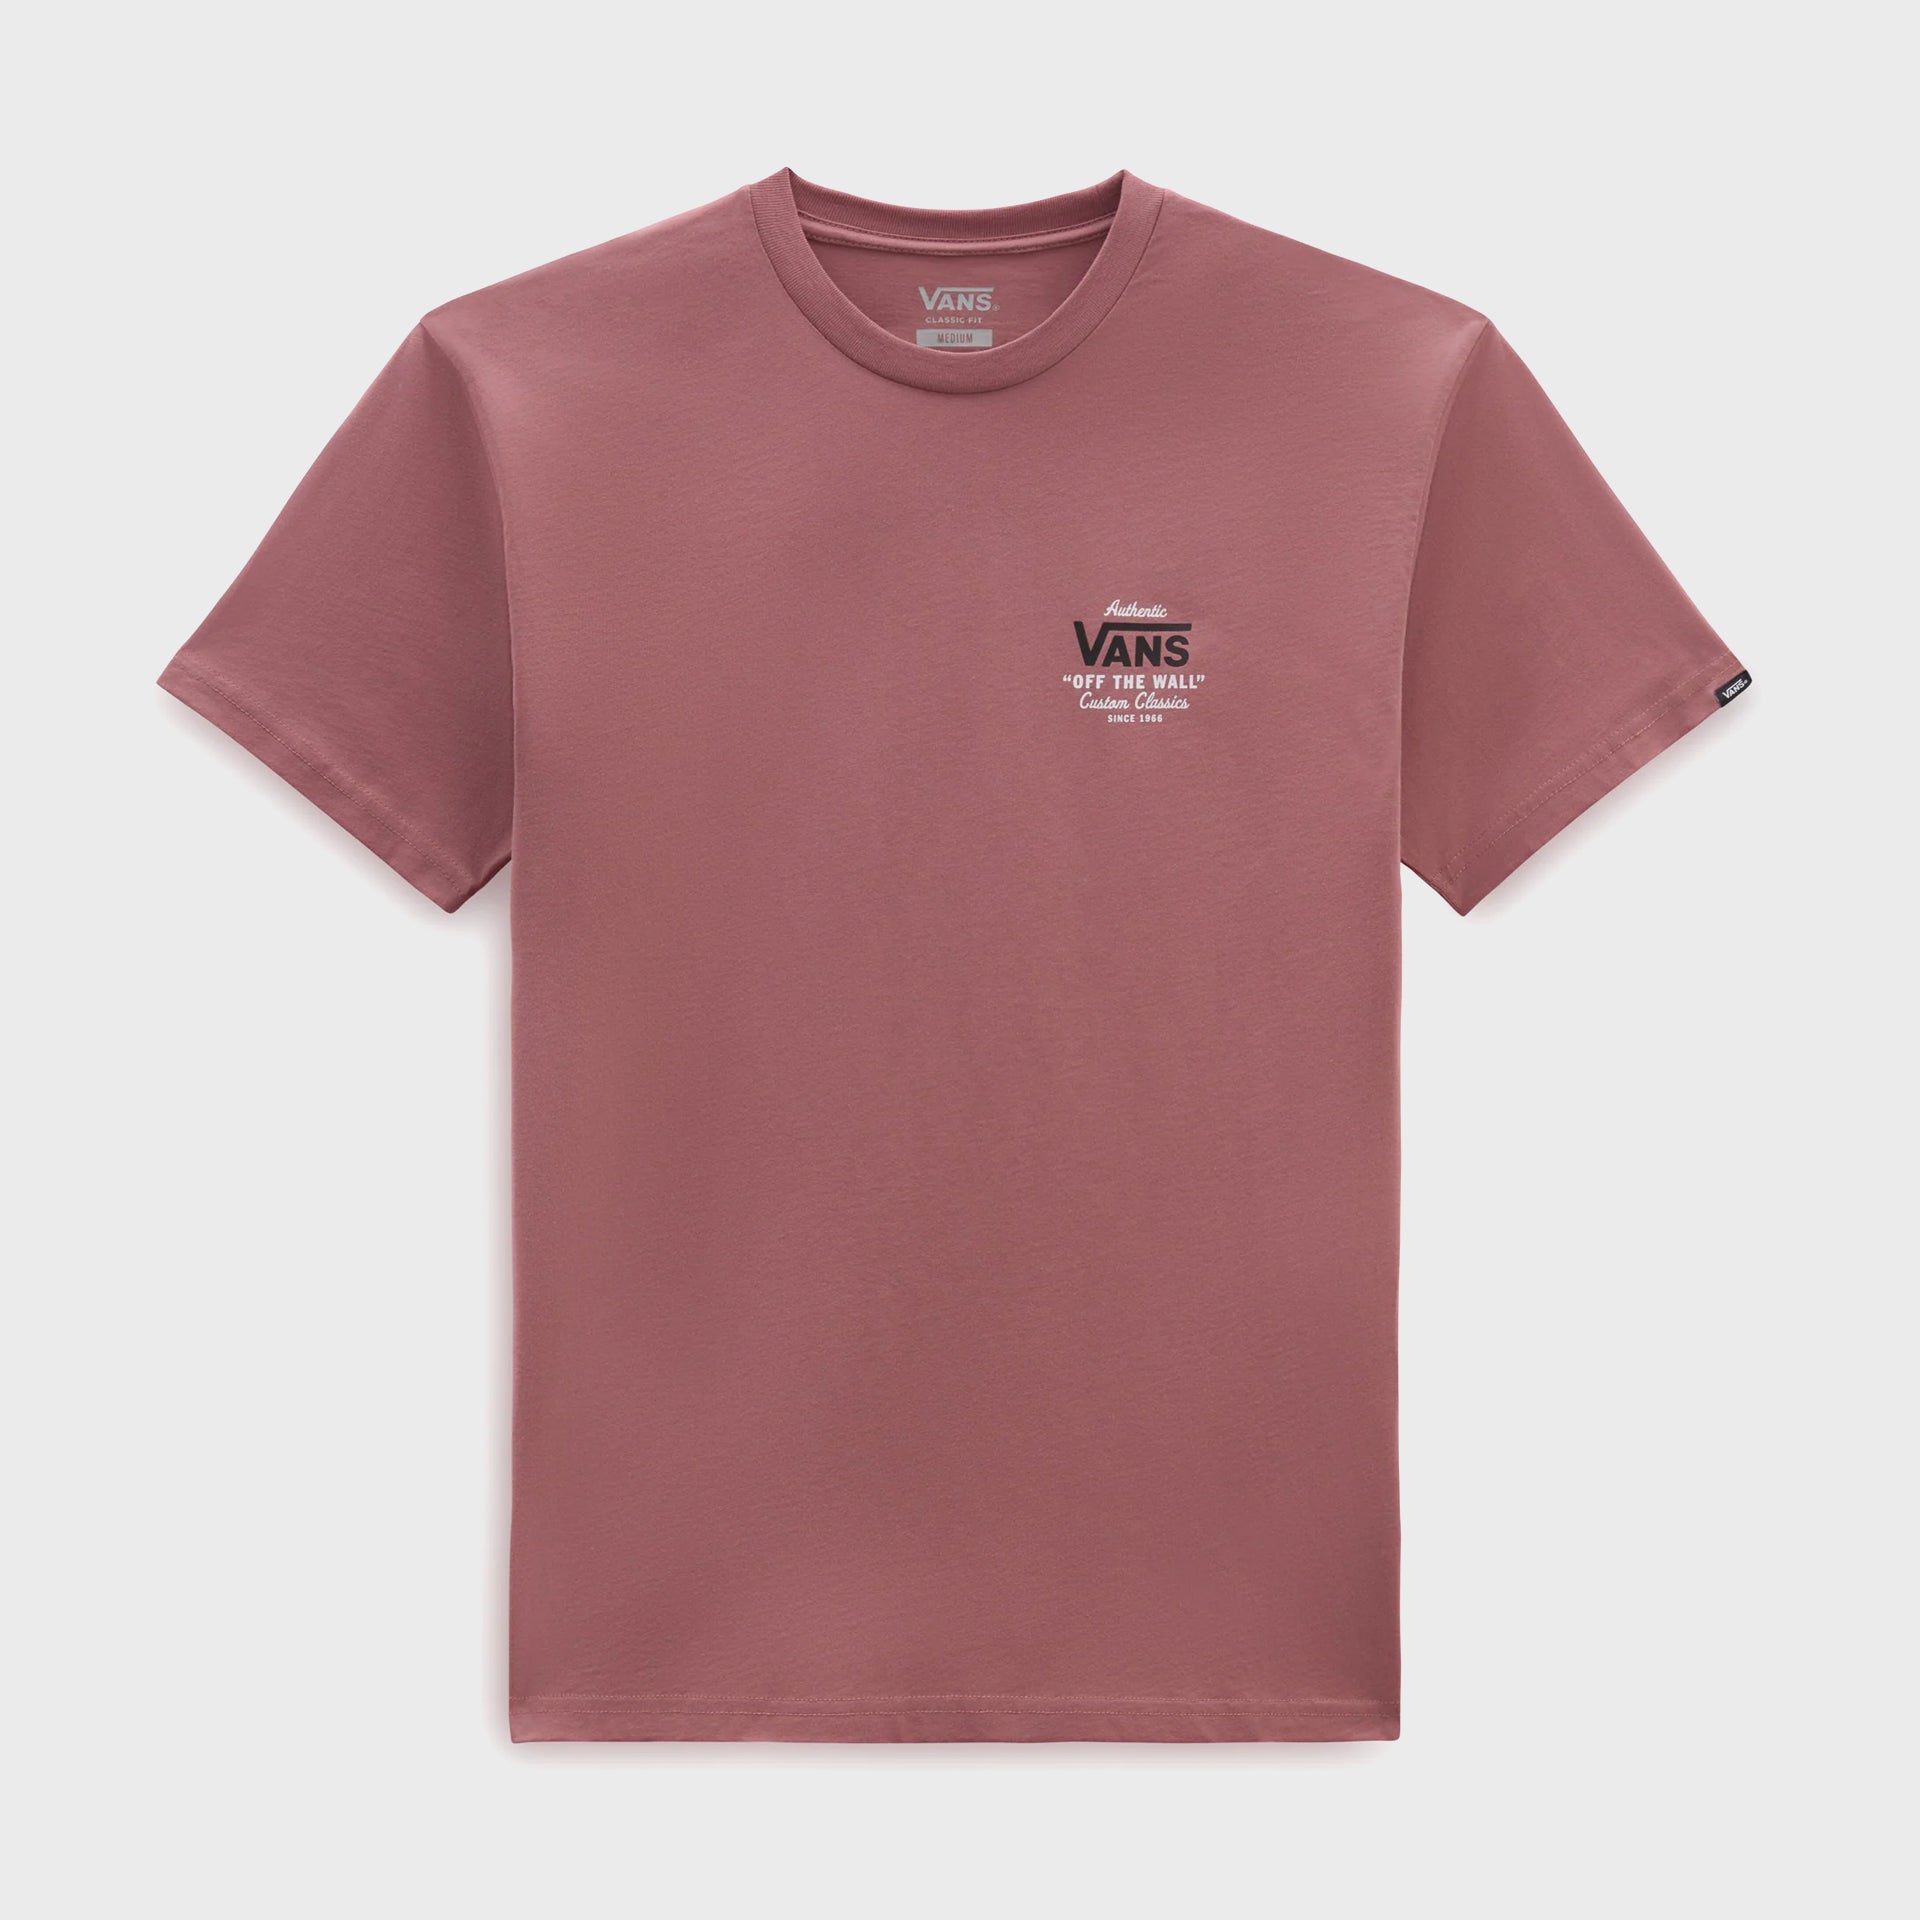 Vans Mens Holder ST Classic T-Shirt - Withered Rose/Black - ManGo Surfing